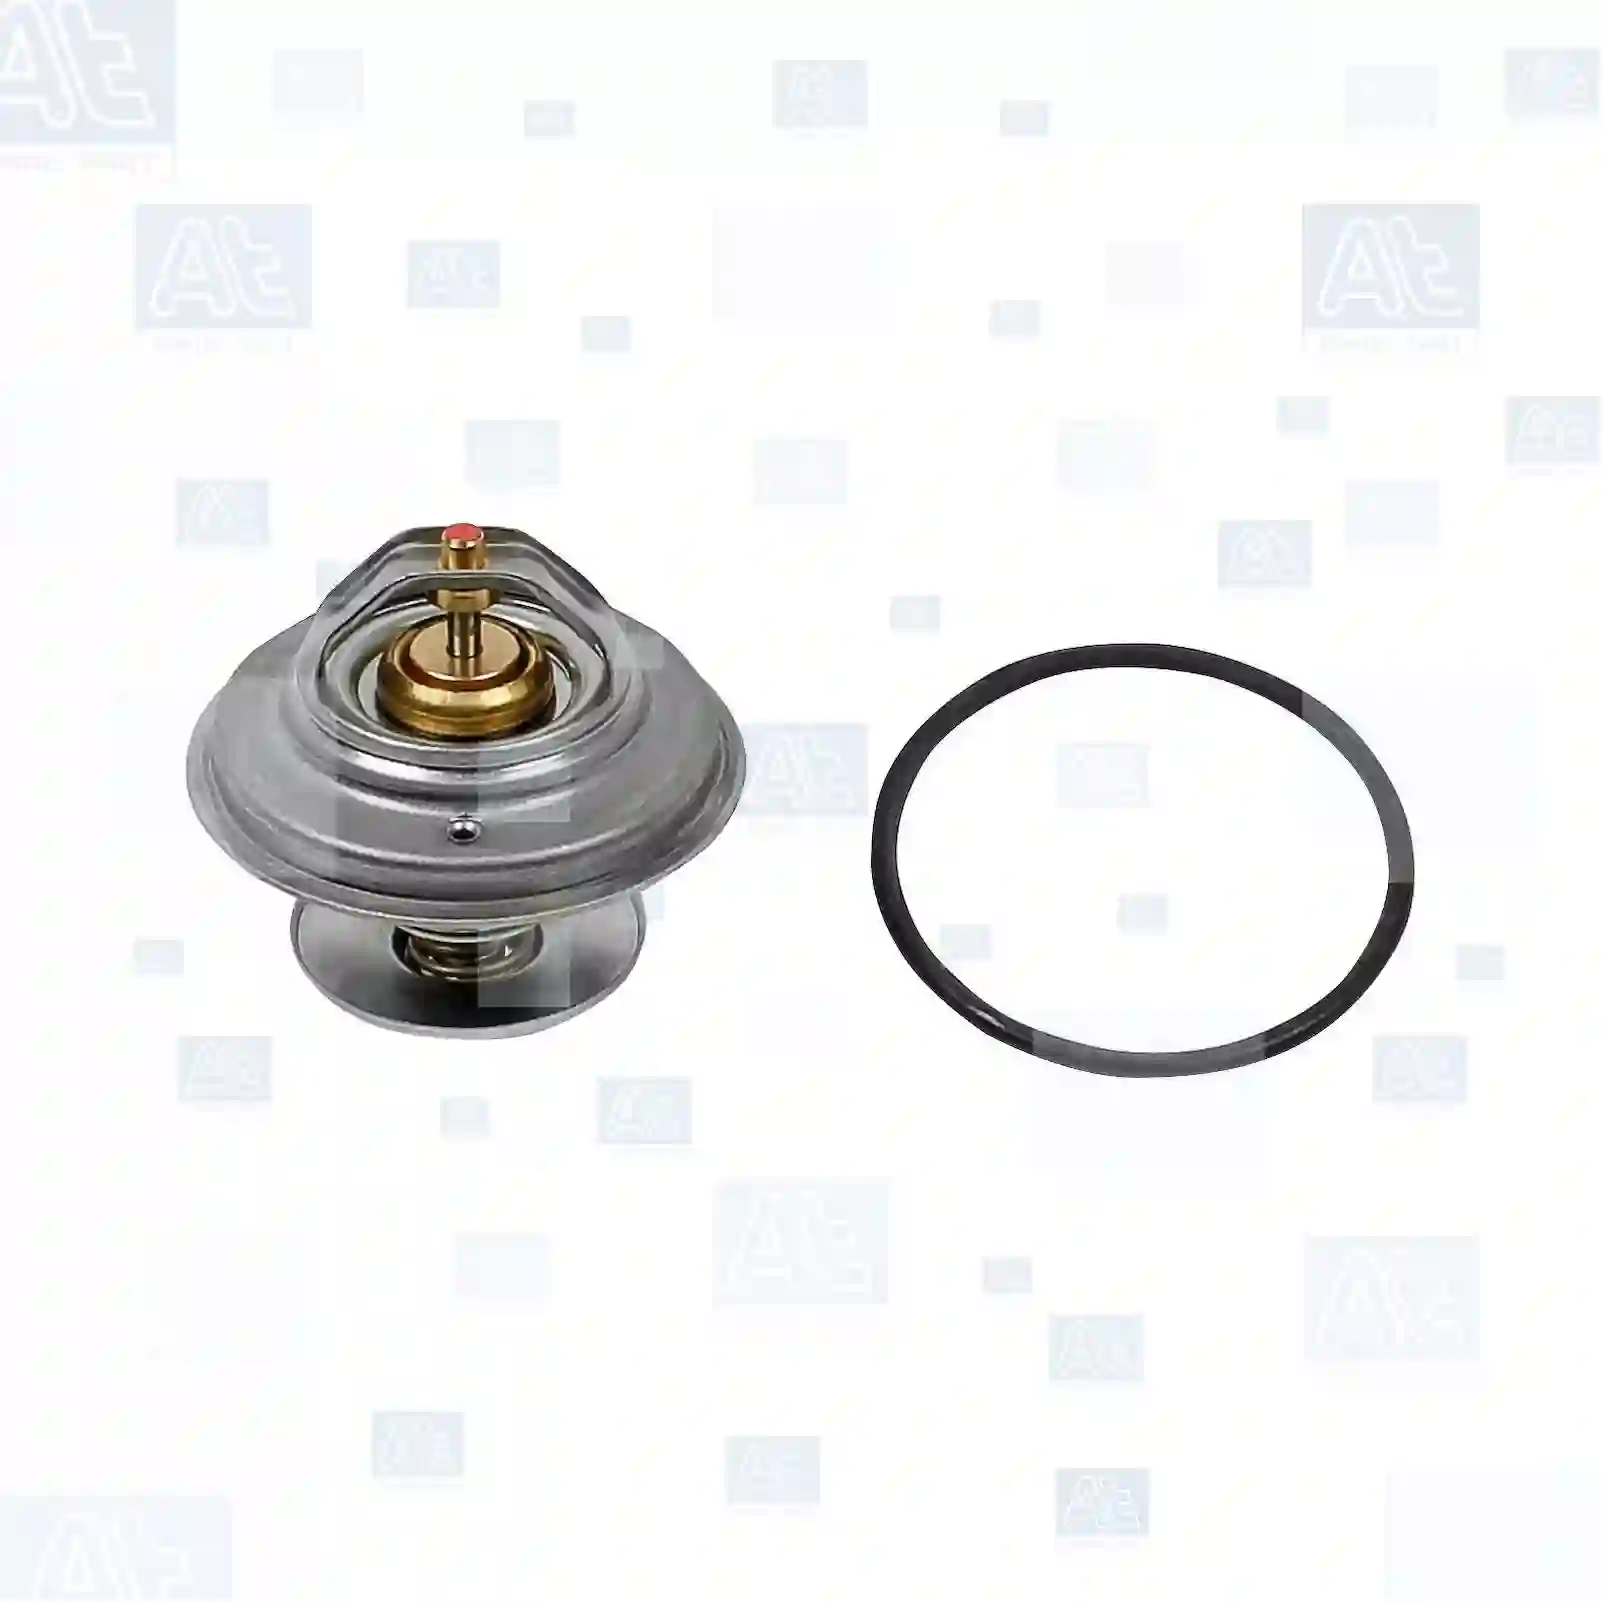 Thermostat, 77707086, 133734, 1102000515, 1112000515, 04224846, 22037675, 22037676, 46130346, 0012036875, 0012039175, 0022037676, 0022038175, 0032038175, 0110200515, 1002000515, 1022000215, 1022000315, 1022001415, 1022001515, 1022001815, 1022001915, 1022030373, 1102000111, 1102000415, 1102000515, 1112000515, 133734, 7700703136, 0022037675, 1102000515, 1112000515, 1622033075, 273480, 2734804, 3273480 ||  77707086 At Spare Part | Engine, Accelerator Pedal, Camshaft, Connecting Rod, Crankcase, Crankshaft, Cylinder Head, Engine Suspension Mountings, Exhaust Manifold, Exhaust Gas Recirculation, Filter Kits, Flywheel Housing, General Overhaul Kits, Engine, Intake Manifold, Oil Cleaner, Oil Cooler, Oil Filter, Oil Pump, Oil Sump, Piston & Liner, Sensor & Switch, Timing Case, Turbocharger, Cooling System, Belt Tensioner, Coolant Filter, Coolant Pipe, Corrosion Prevention Agent, Drive, Expansion Tank, Fan, Intercooler, Monitors & Gauges, Radiator, Thermostat, V-Belt / Timing belt, Water Pump, Fuel System, Electronical Injector Unit, Feed Pump, Fuel Filter, cpl., Fuel Gauge Sender,  Fuel Line, Fuel Pump, Fuel Tank, Injection Line Kit, Injection Pump, Exhaust System, Clutch & Pedal, Gearbox, Propeller Shaft, Axles, Brake System, Hubs & Wheels, Suspension, Leaf Spring, Universal Parts / Accessories, Steering, Electrical System, Cabin Thermostat, 77707086, 133734, 1102000515, 1112000515, 04224846, 22037675, 22037676, 46130346, 0012036875, 0012039175, 0022037676, 0022038175, 0032038175, 0110200515, 1002000515, 1022000215, 1022000315, 1022001415, 1022001515, 1022001815, 1022001915, 1022030373, 1102000111, 1102000415, 1102000515, 1112000515, 133734, 7700703136, 0022037675, 1102000515, 1112000515, 1622033075, 273480, 2734804, 3273480 ||  77707086 At Spare Part | Engine, Accelerator Pedal, Camshaft, Connecting Rod, Crankcase, Crankshaft, Cylinder Head, Engine Suspension Mountings, Exhaust Manifold, Exhaust Gas Recirculation, Filter Kits, Flywheel Housing, General Overhaul Kits, Engine, Intake Manifold, Oil Cleaner, Oil Cooler, Oil Filter, Oil Pump, Oil Sump, Piston & Liner, Sensor & Switch, Timing Case, Turbocharger, Cooling System, Belt Tensioner, Coolant Filter, Coolant Pipe, Corrosion Prevention Agent, Drive, Expansion Tank, Fan, Intercooler, Monitors & Gauges, Radiator, Thermostat, V-Belt / Timing belt, Water Pump, Fuel System, Electronical Injector Unit, Feed Pump, Fuel Filter, cpl., Fuel Gauge Sender,  Fuel Line, Fuel Pump, Fuel Tank, Injection Line Kit, Injection Pump, Exhaust System, Clutch & Pedal, Gearbox, Propeller Shaft, Axles, Brake System, Hubs & Wheels, Suspension, Leaf Spring, Universal Parts / Accessories, Steering, Electrical System, Cabin